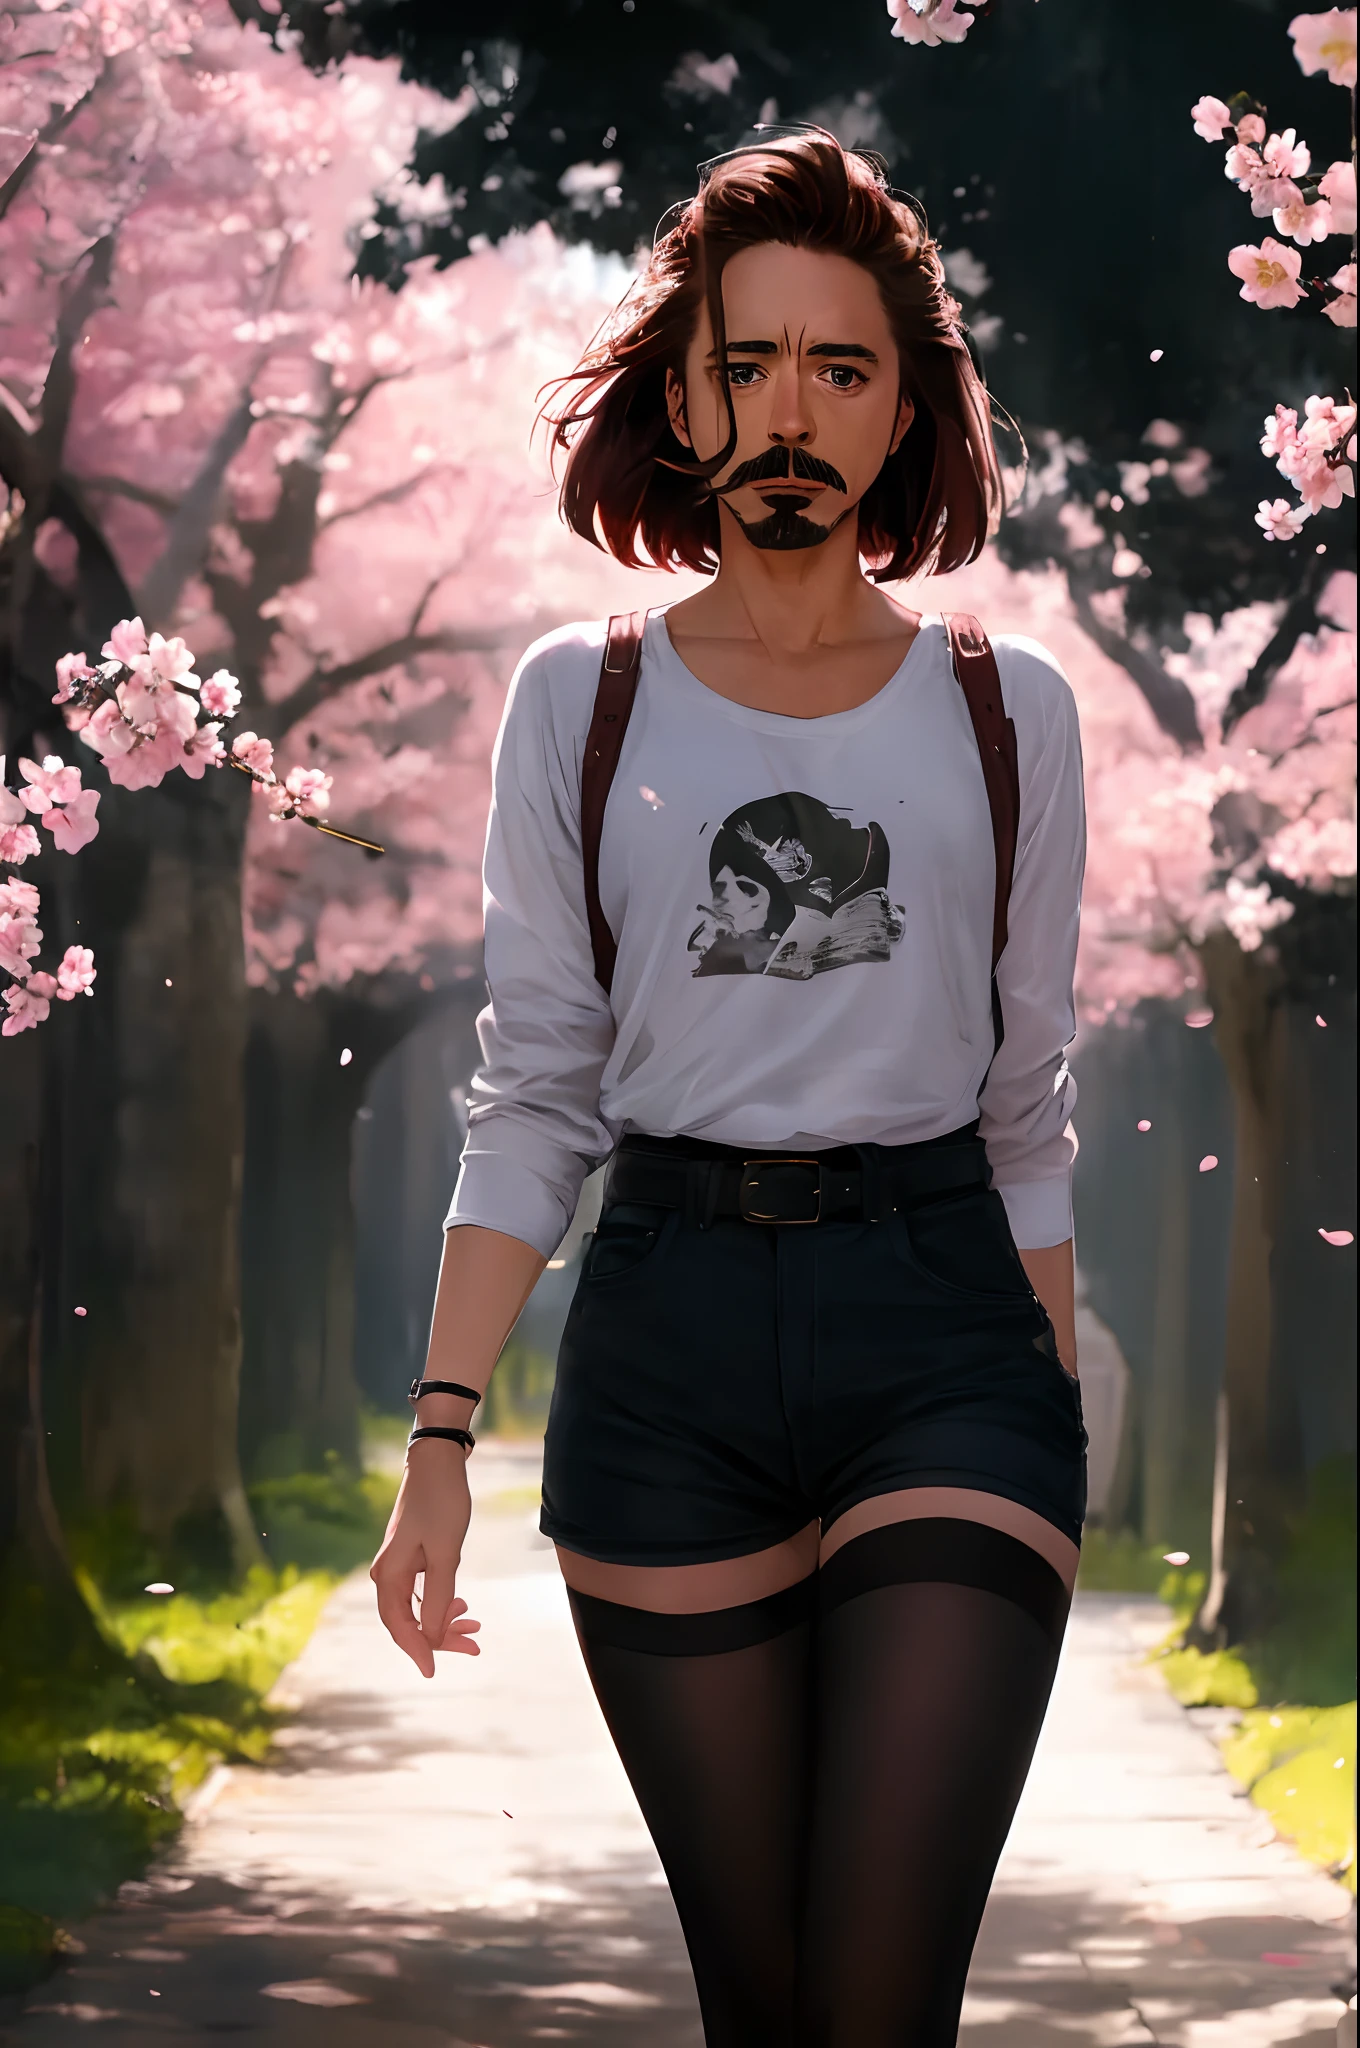 Robert Downey as a 16 year old girl, rock shirt, tiny shorts, waist-high black tights, exposed thighs, very fair skin, Robert Downey's haircut, Mustache and goatee, Temple of Saolin, cherry blossom , Indirect lighting, volumetric light, hyper-detailed, Captured by Panavision Panaflex Platinum